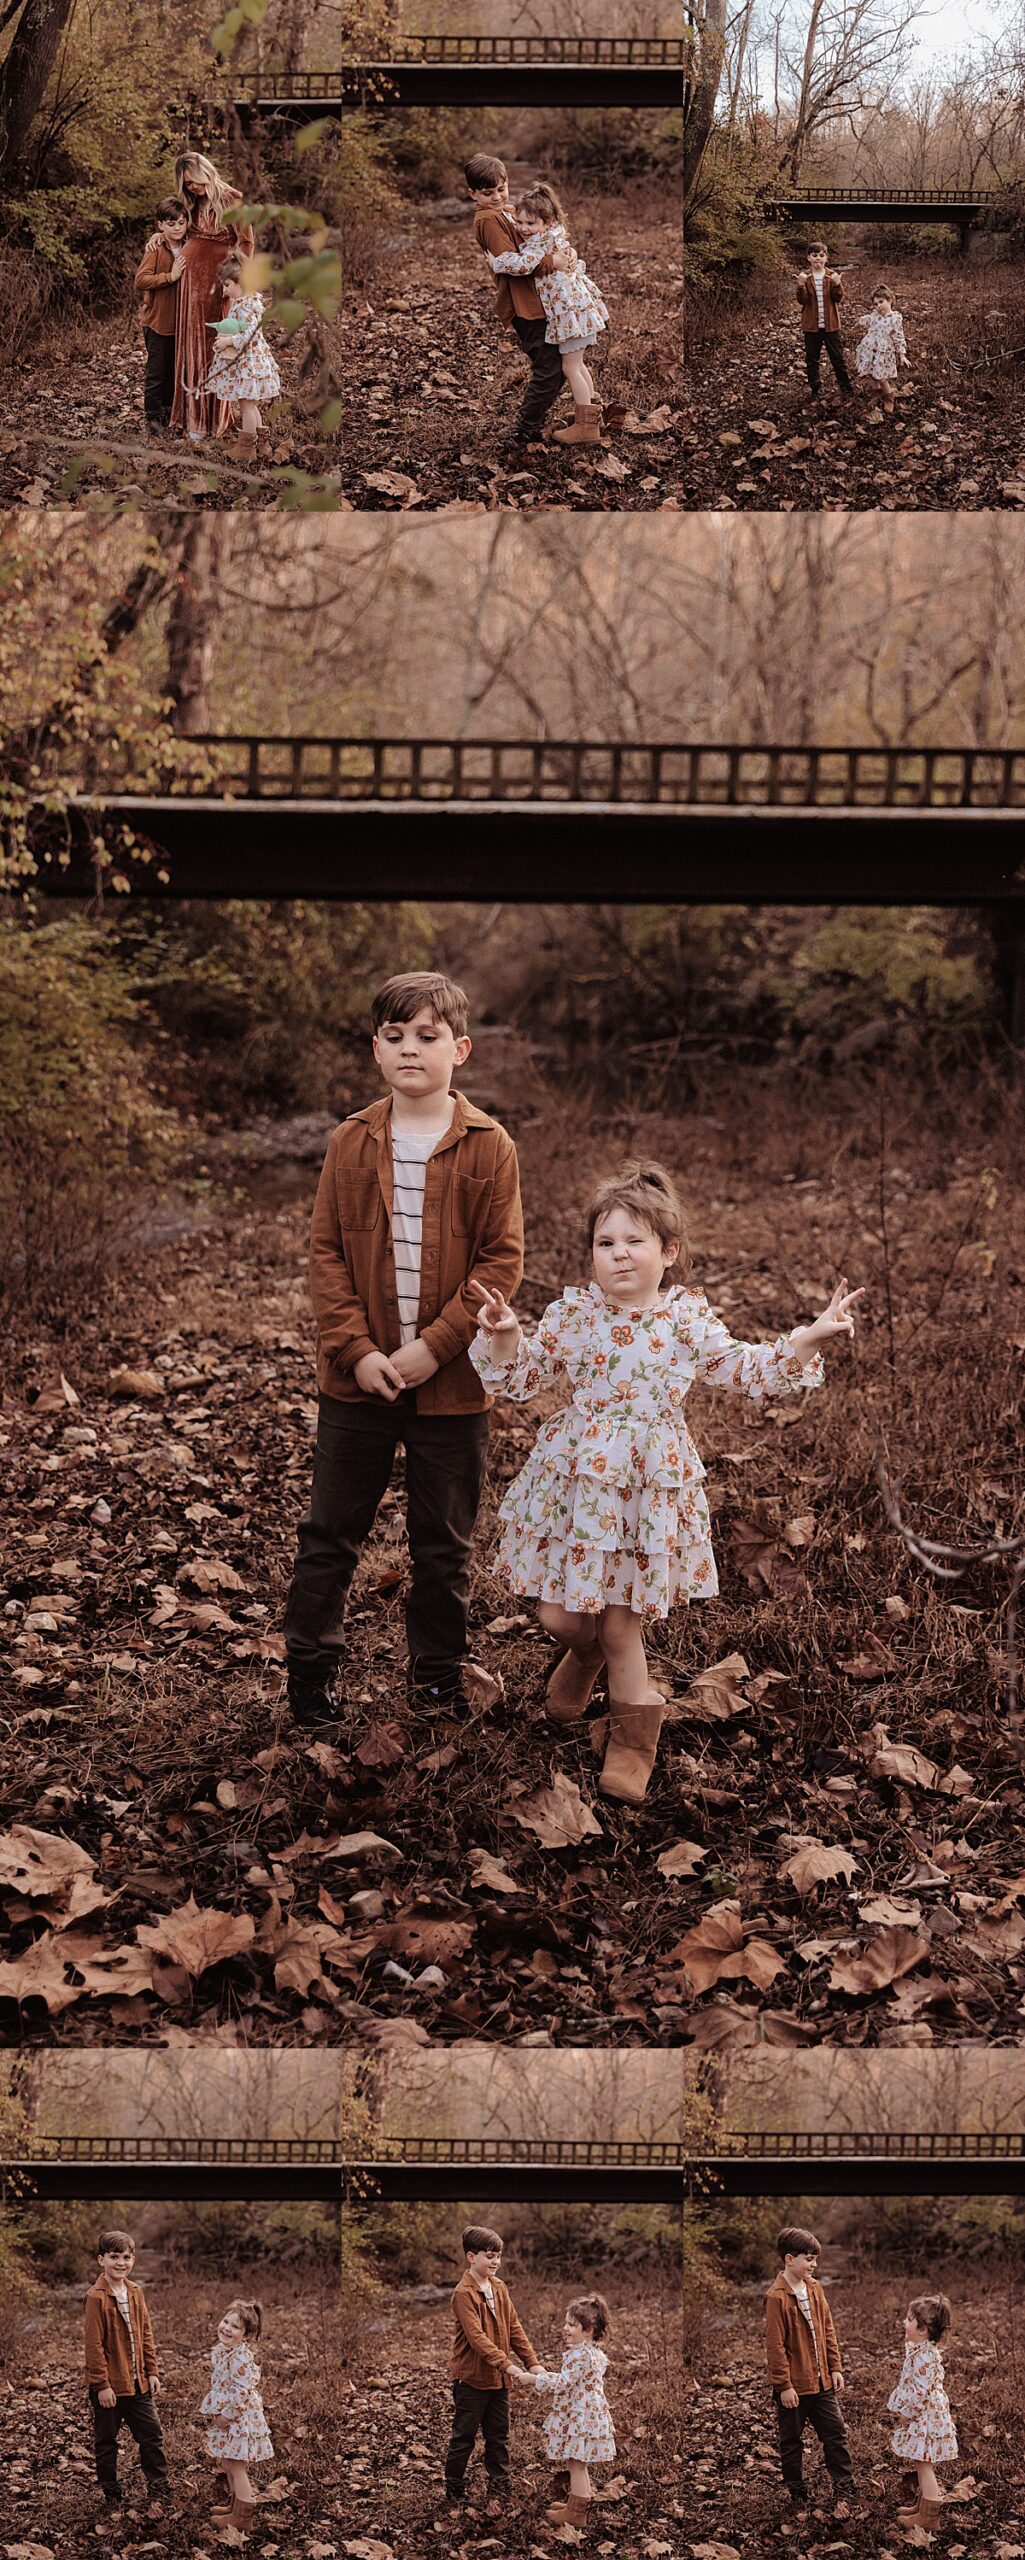 A little boy and his younger sister stand on a creek bank